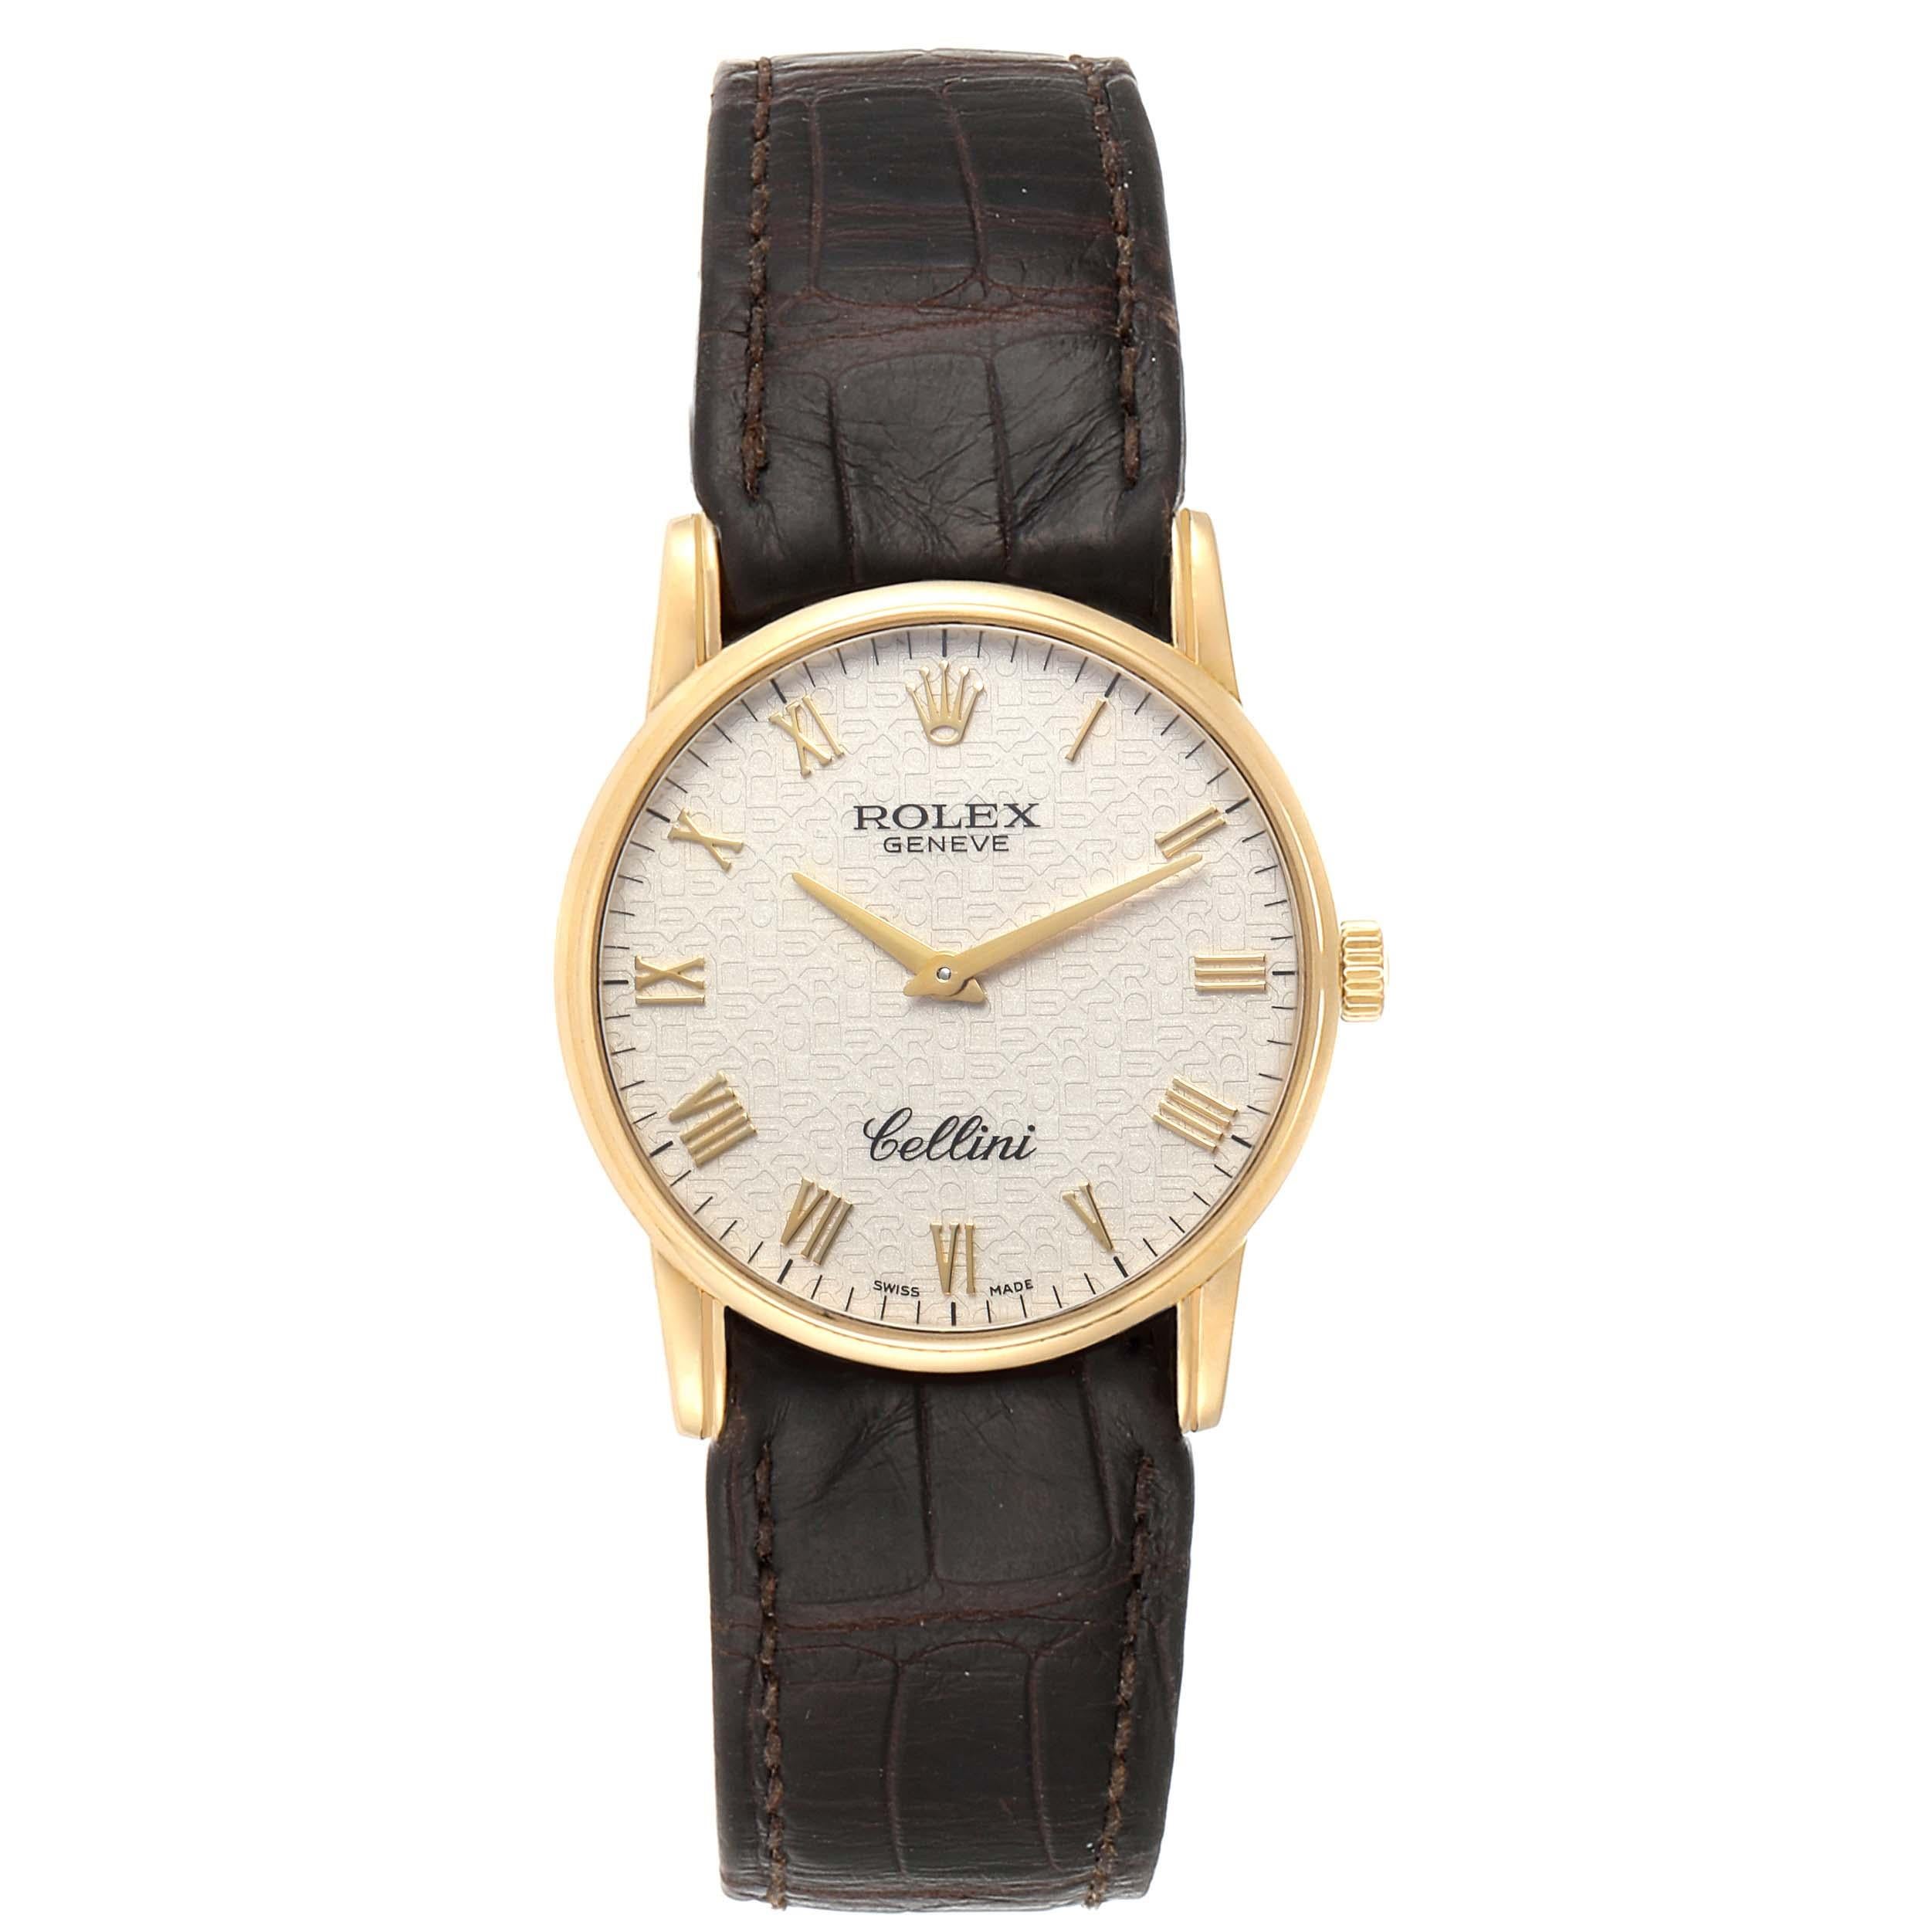 Rolex Cellini Classic Yellow Gold Anniversary Dial Brown Strap Watch 5116. Manual winding movement. 18k yellow gold slim case 31.8 x 5.5 mm in diameter. Rolex logo on a crown. . Scratch resistant sapphire crystal. Flat profile. Ivory jubilee